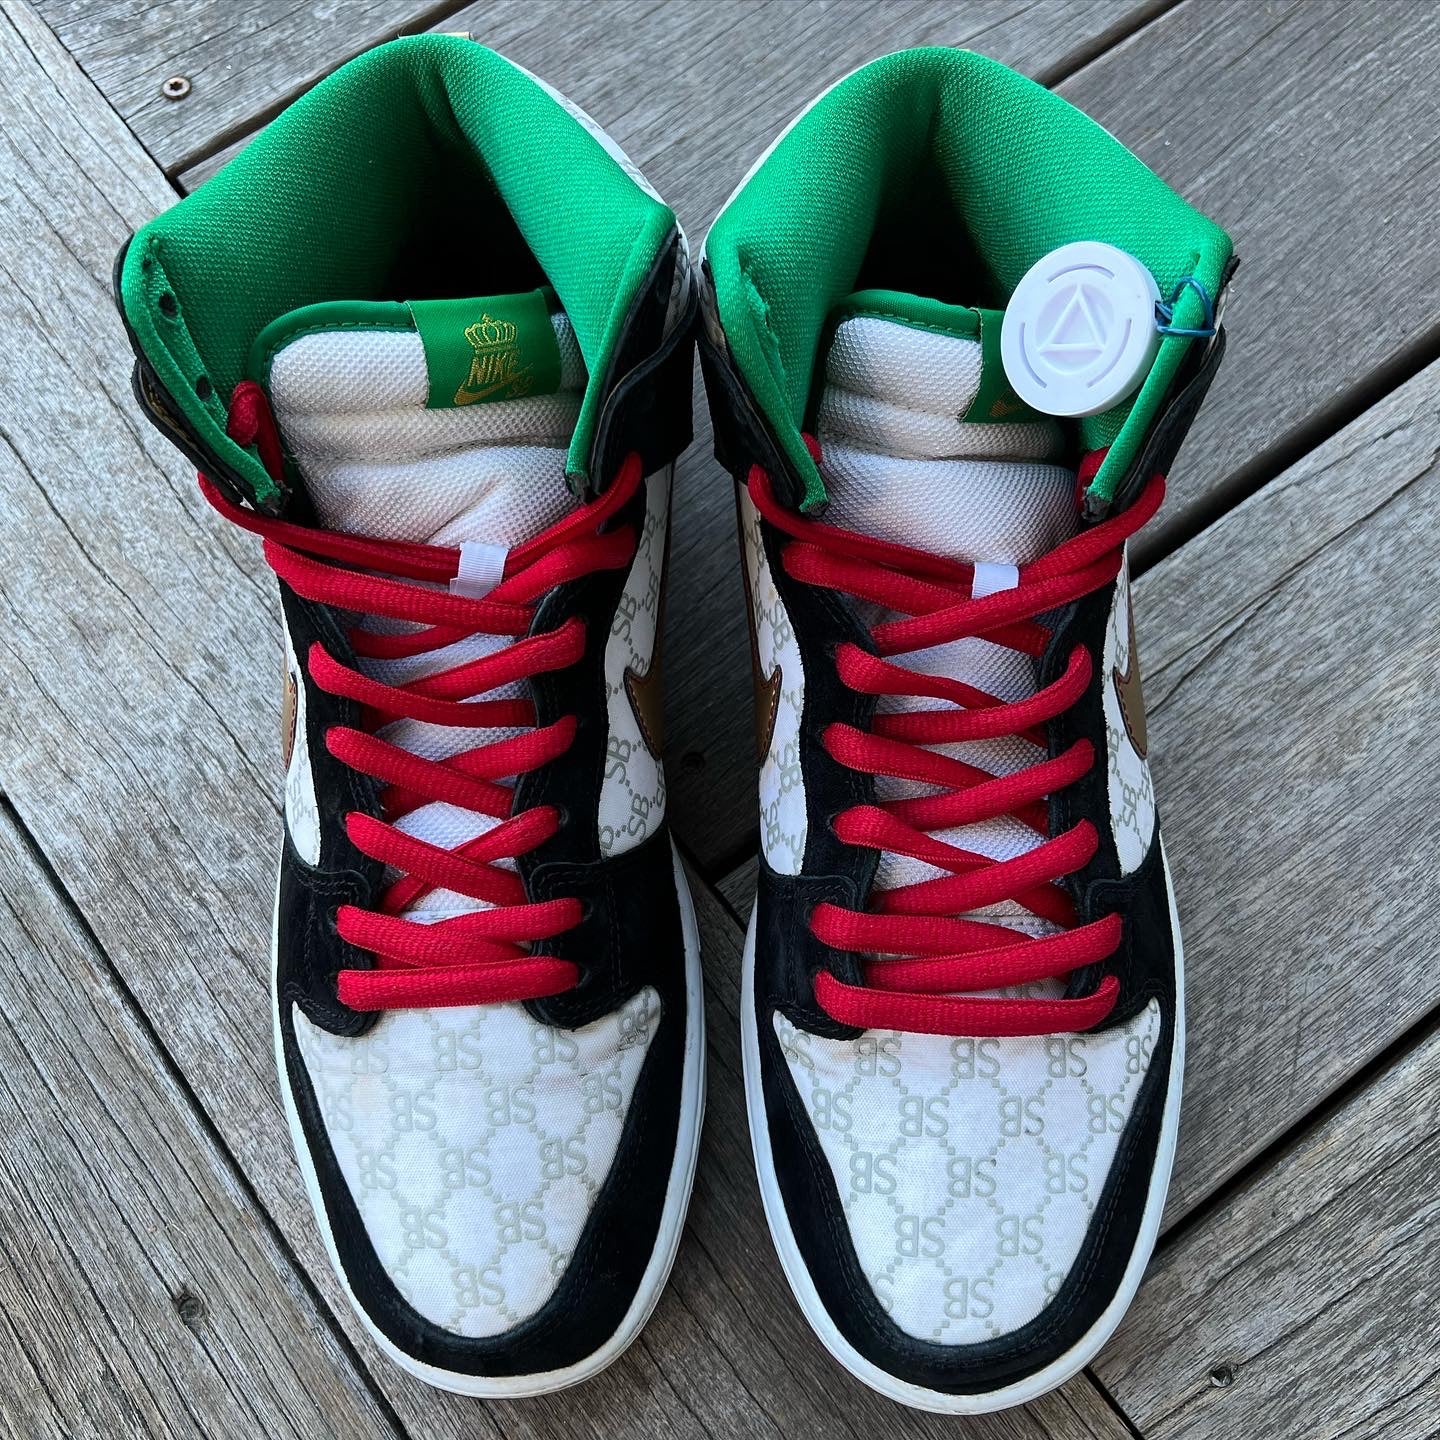 Nike SB Dunk High Paid in Full Size 11.5